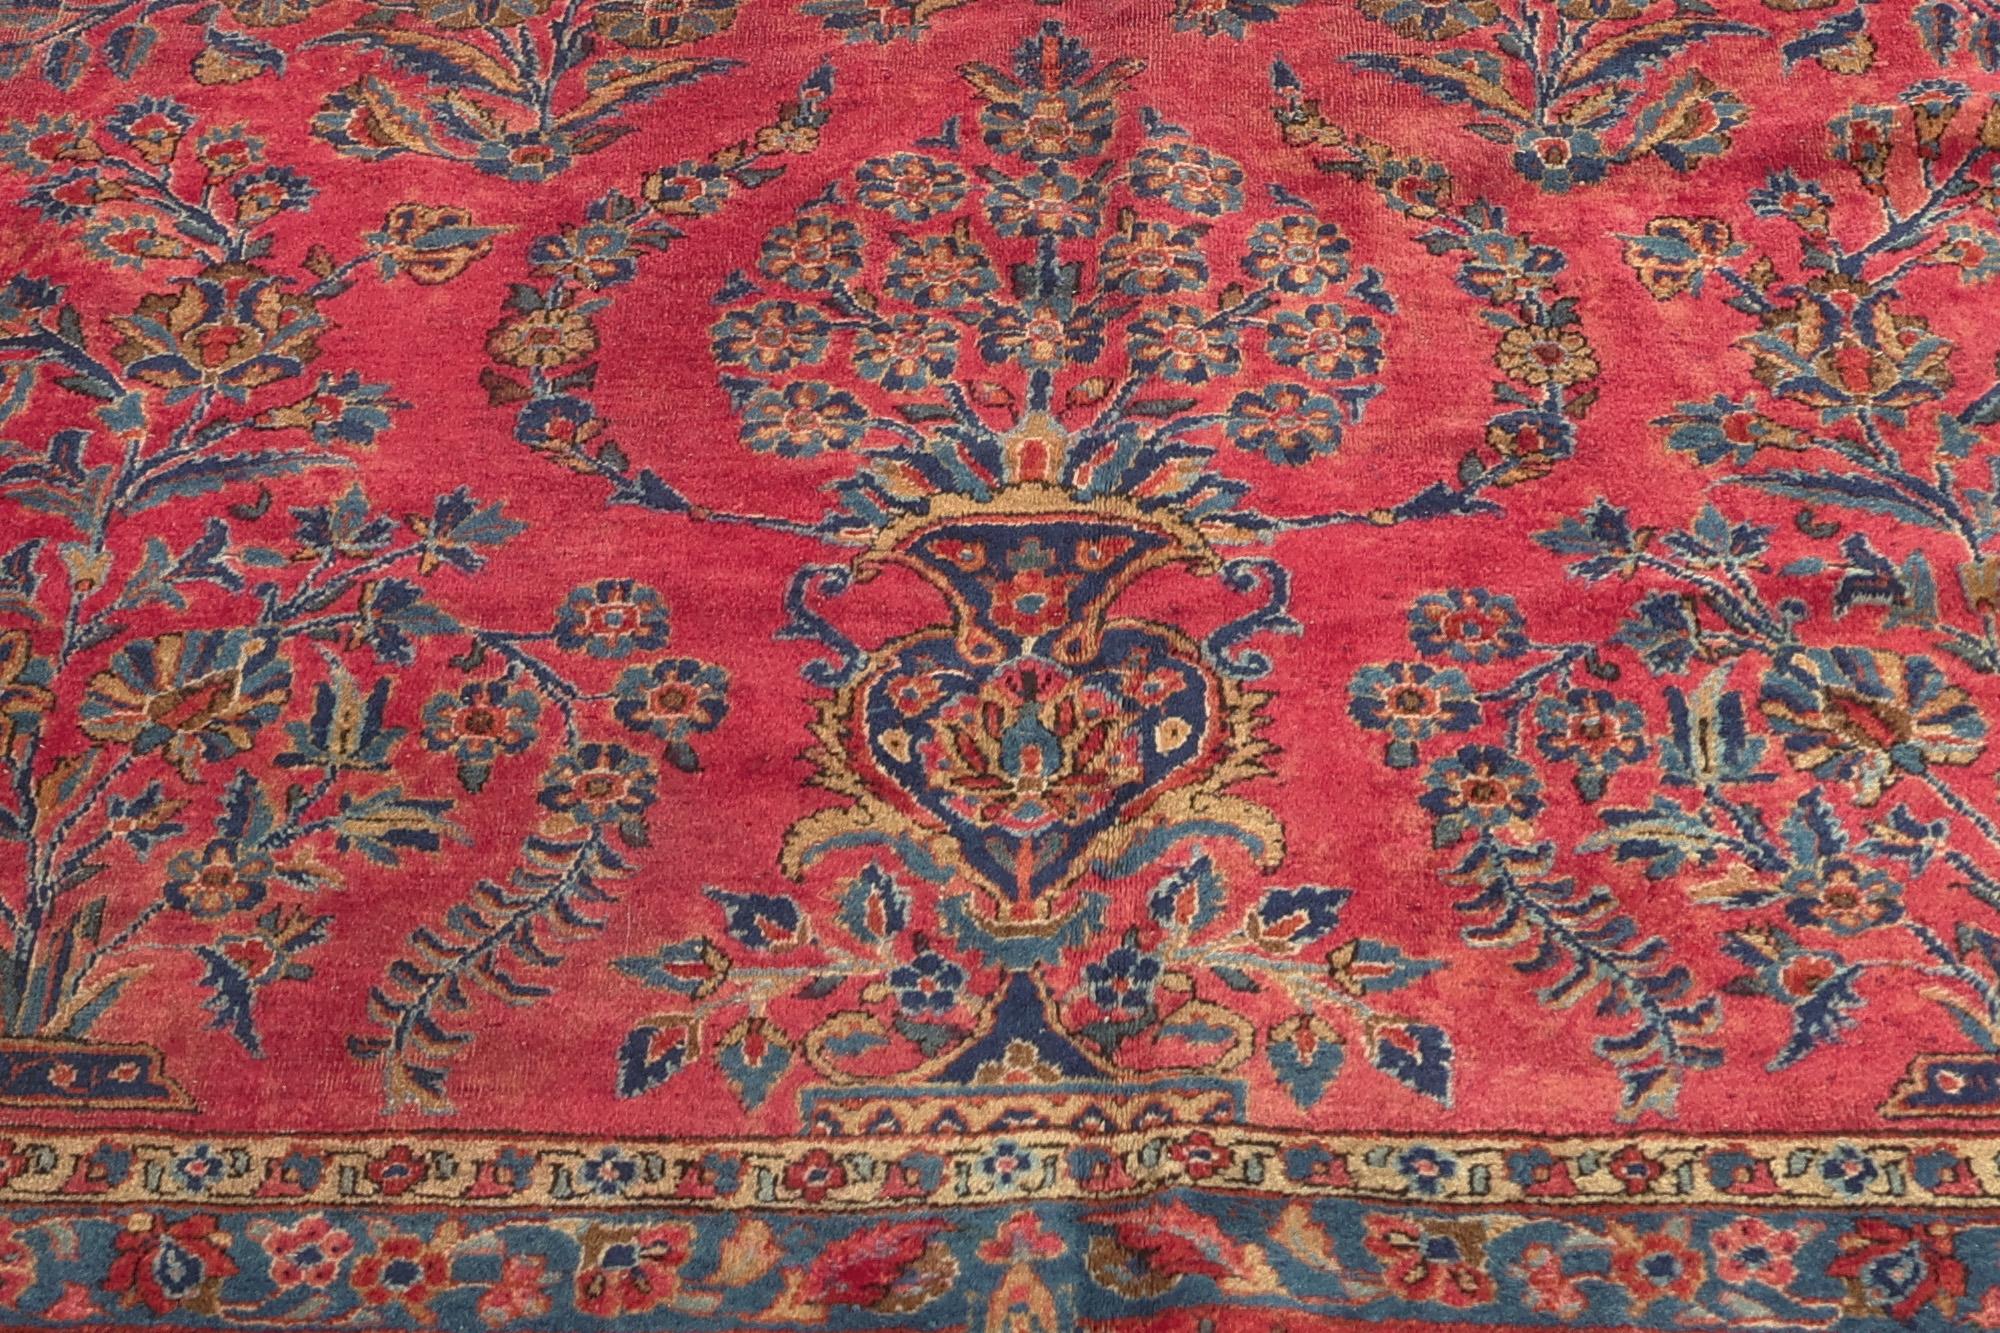 Wool Antique Persian Kashan Rug with Art Nouveau Style in Rich Jewel Tones